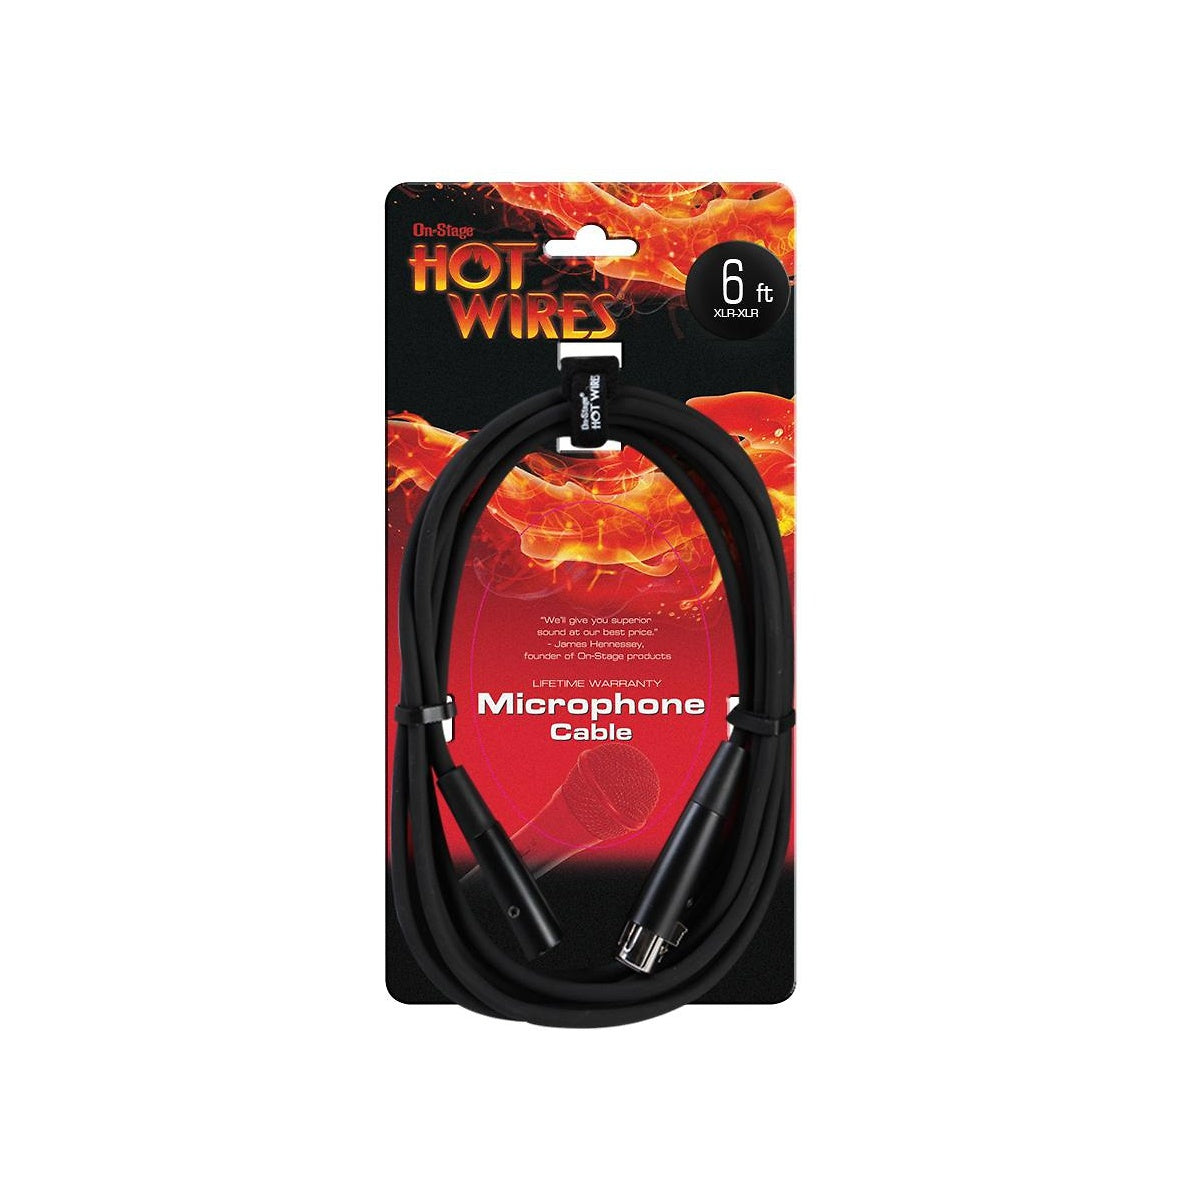 Hot Wires Microphone Cable, 6 Foot